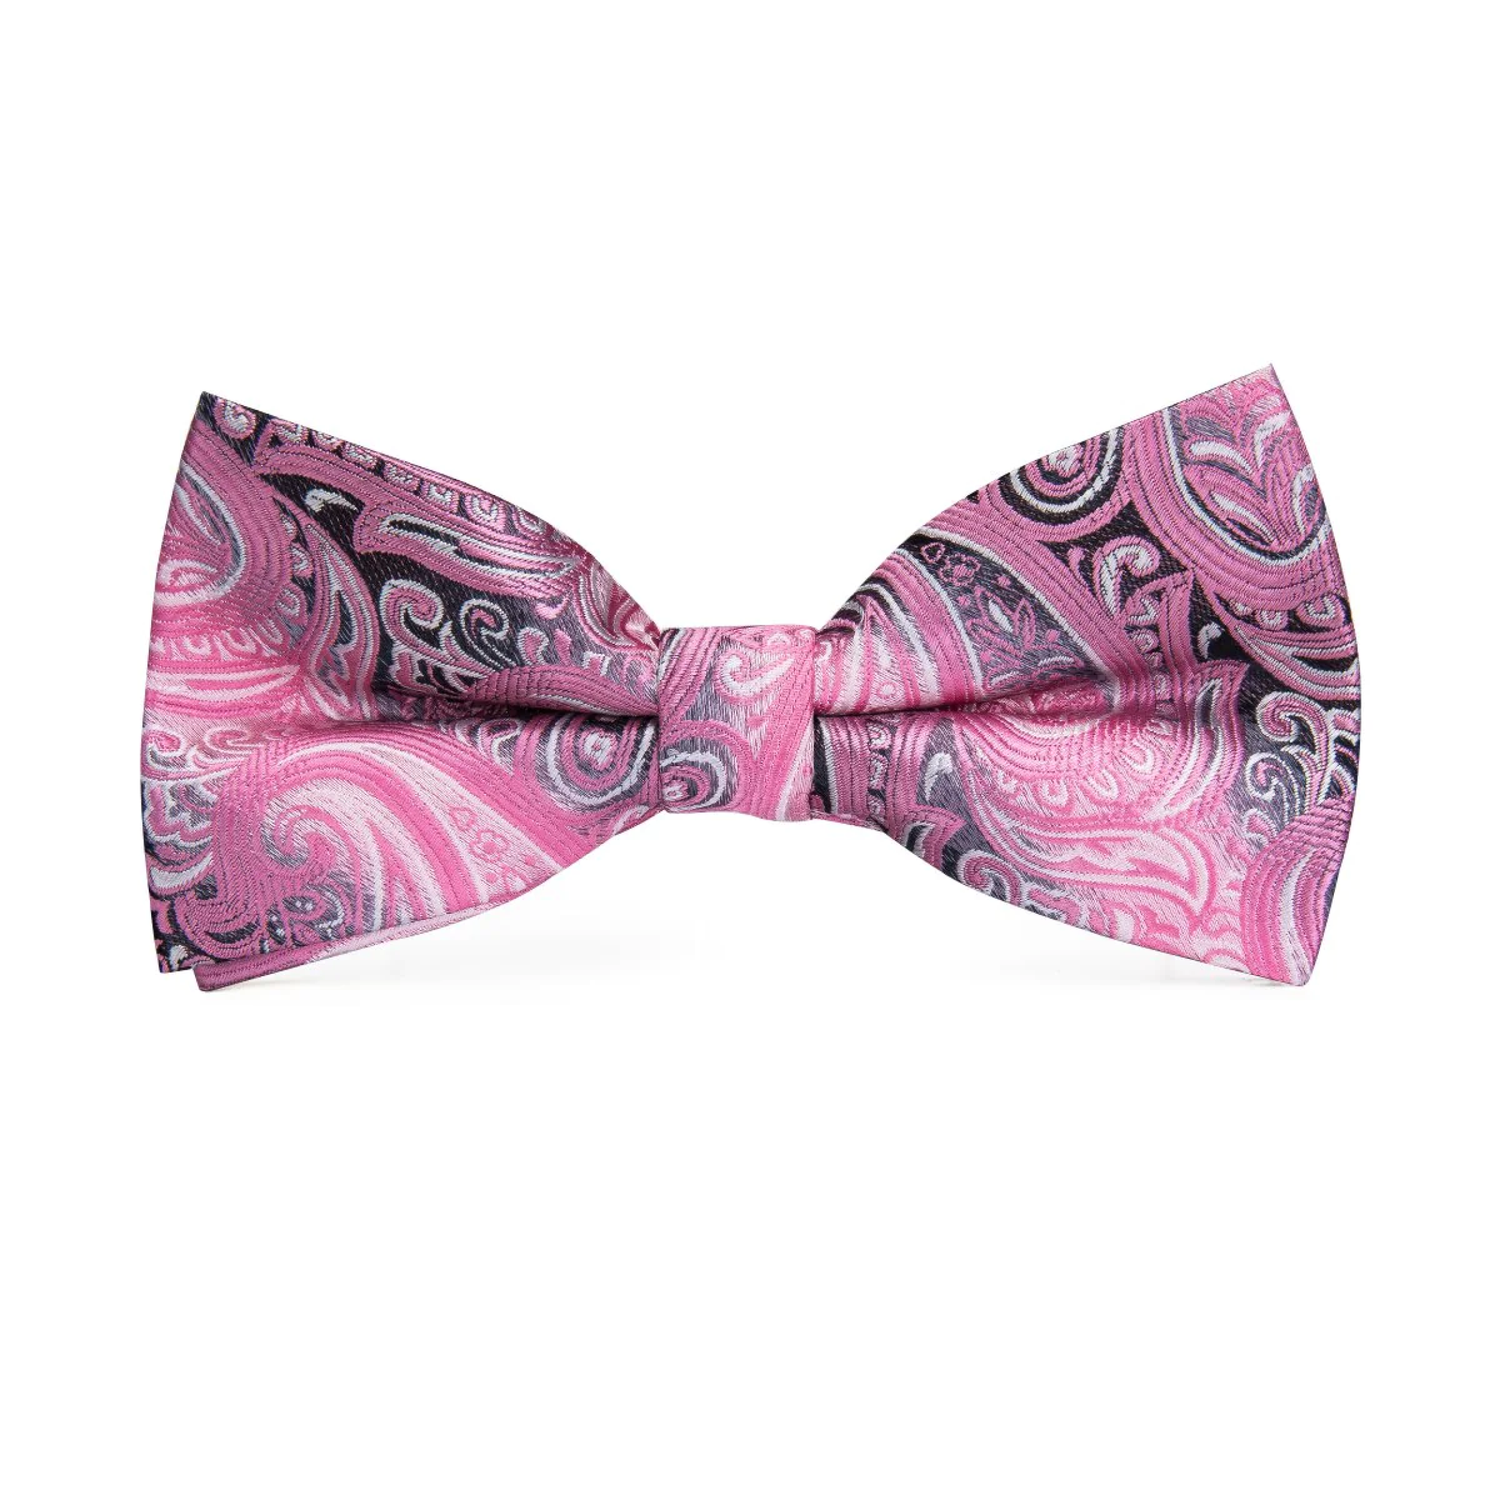 Grey and Pink Faded Fiber Paisley Bow Tie 